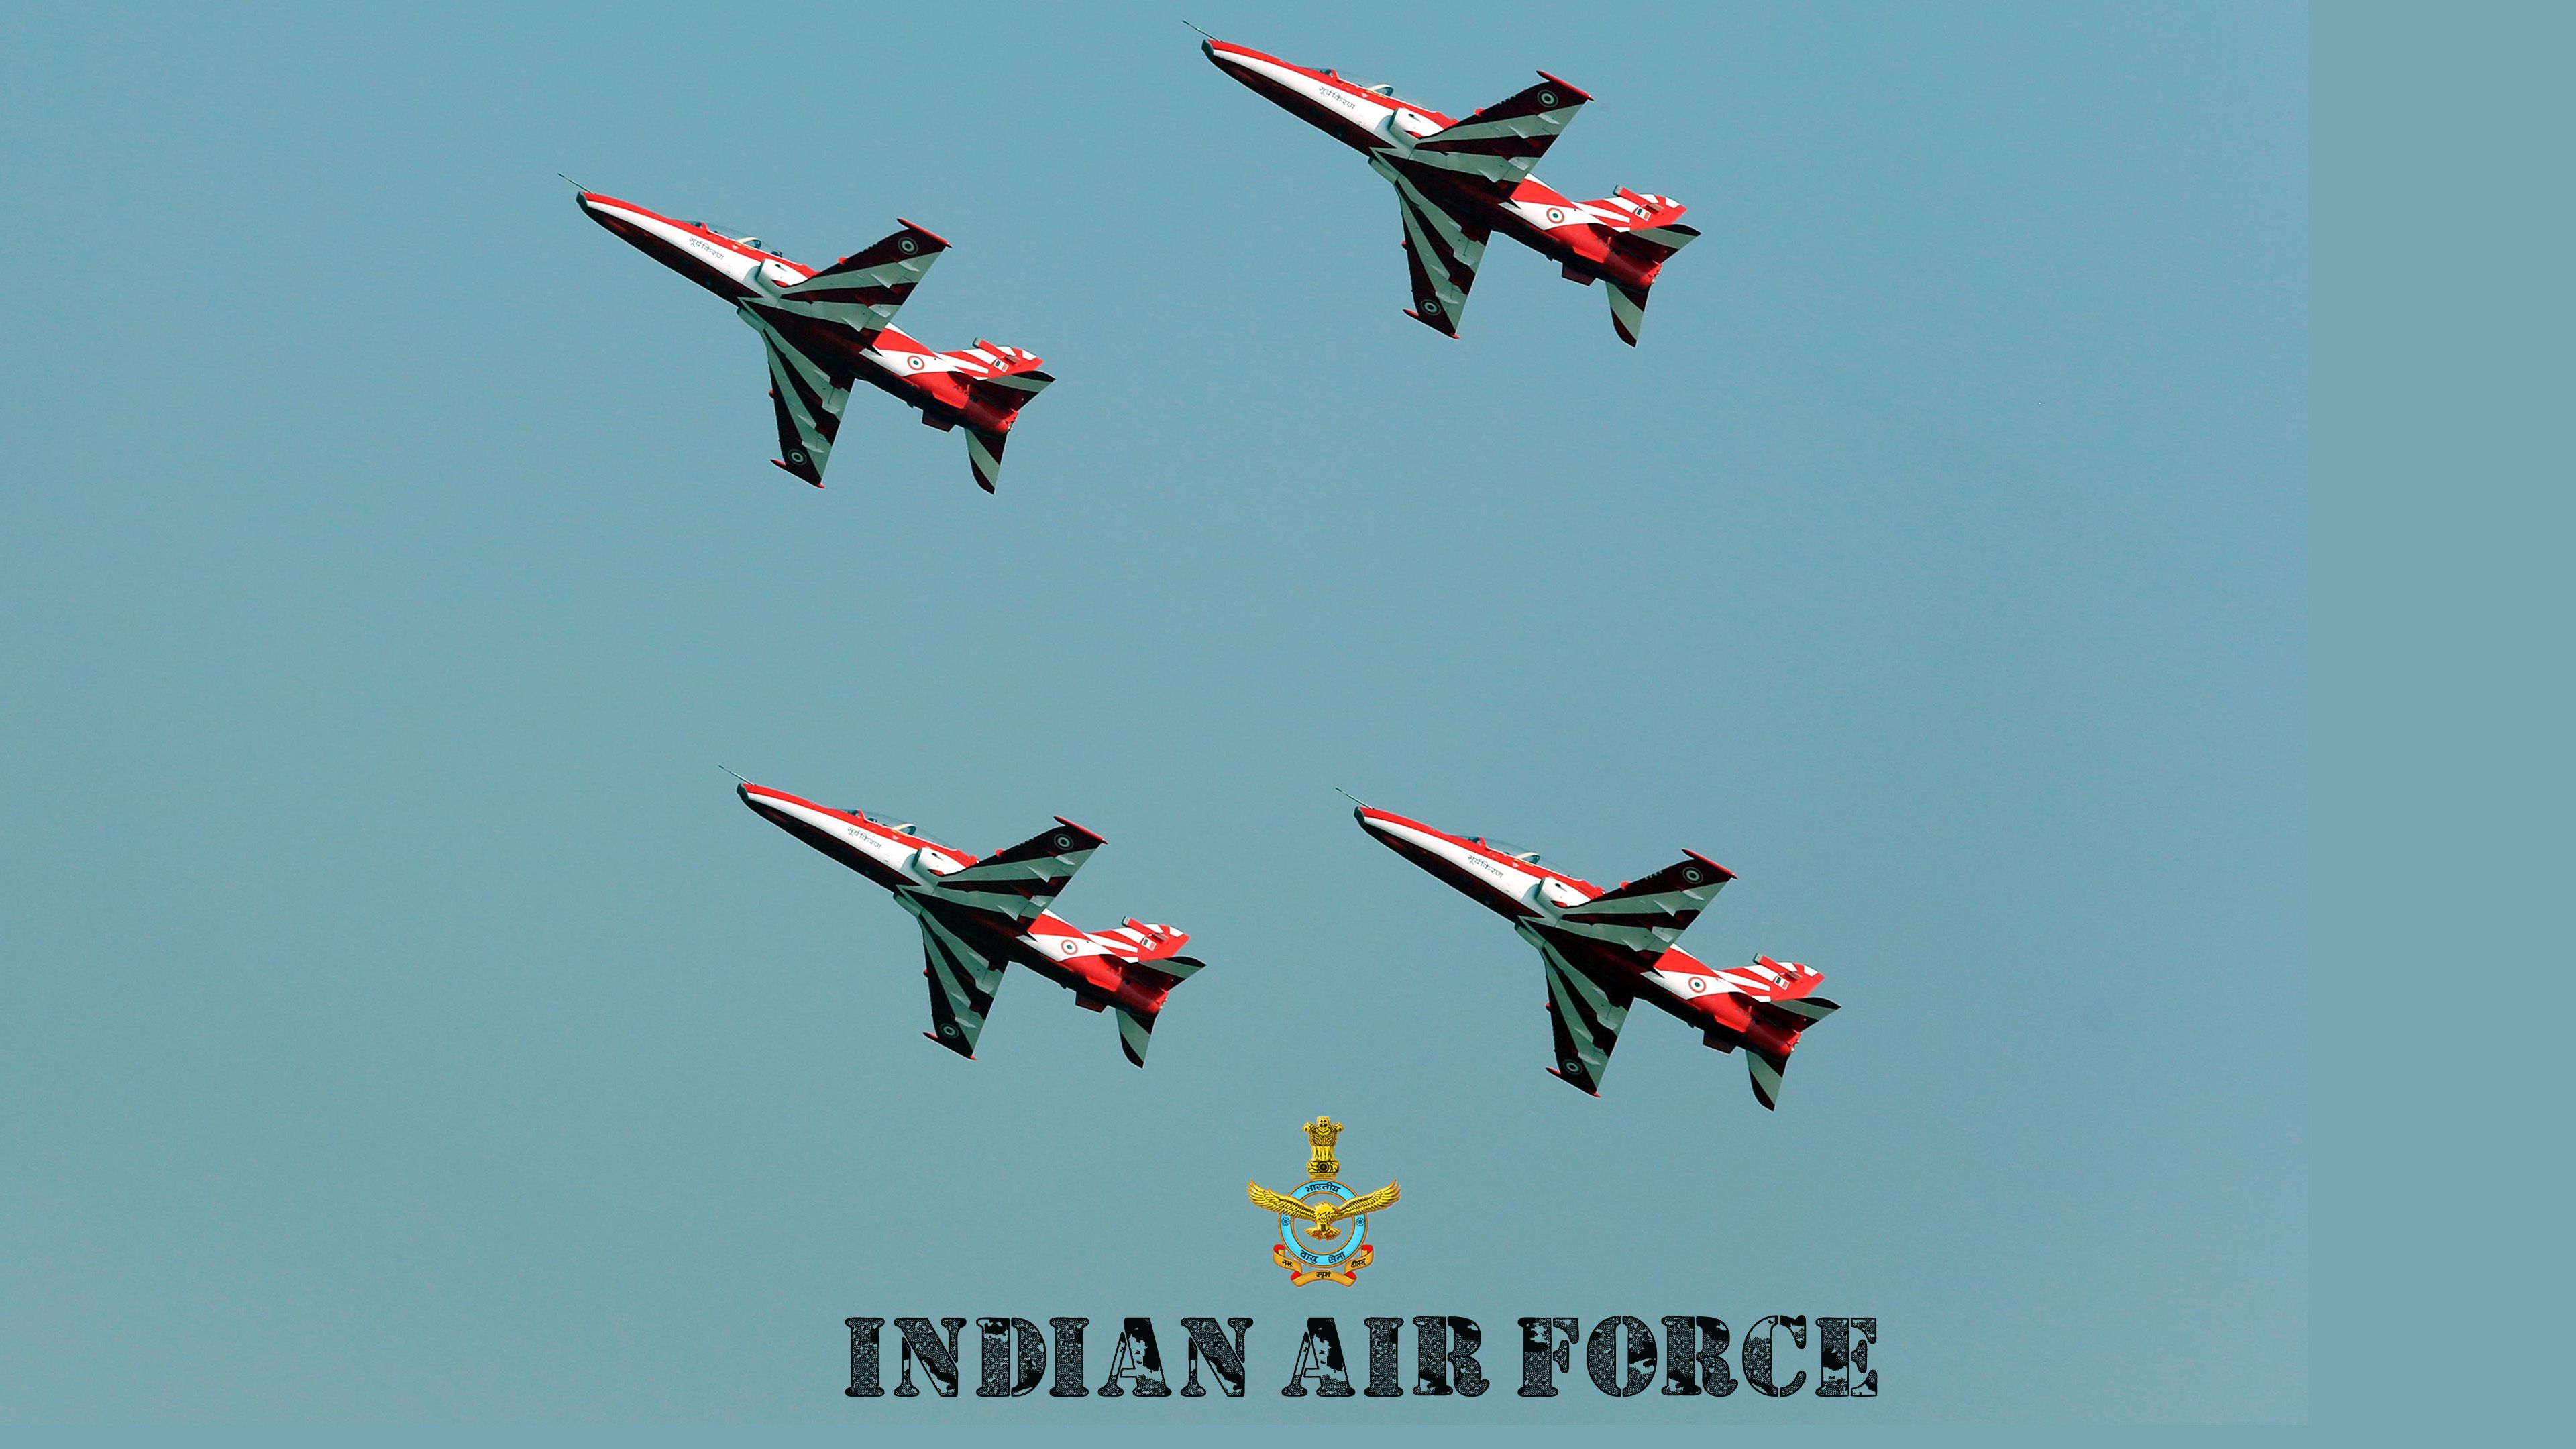 Indian Air Force Wallpaper with Advanced Jet Trainer Aircrafts Wallpaper. Wallpaper Download. High Resolution Wallpaper